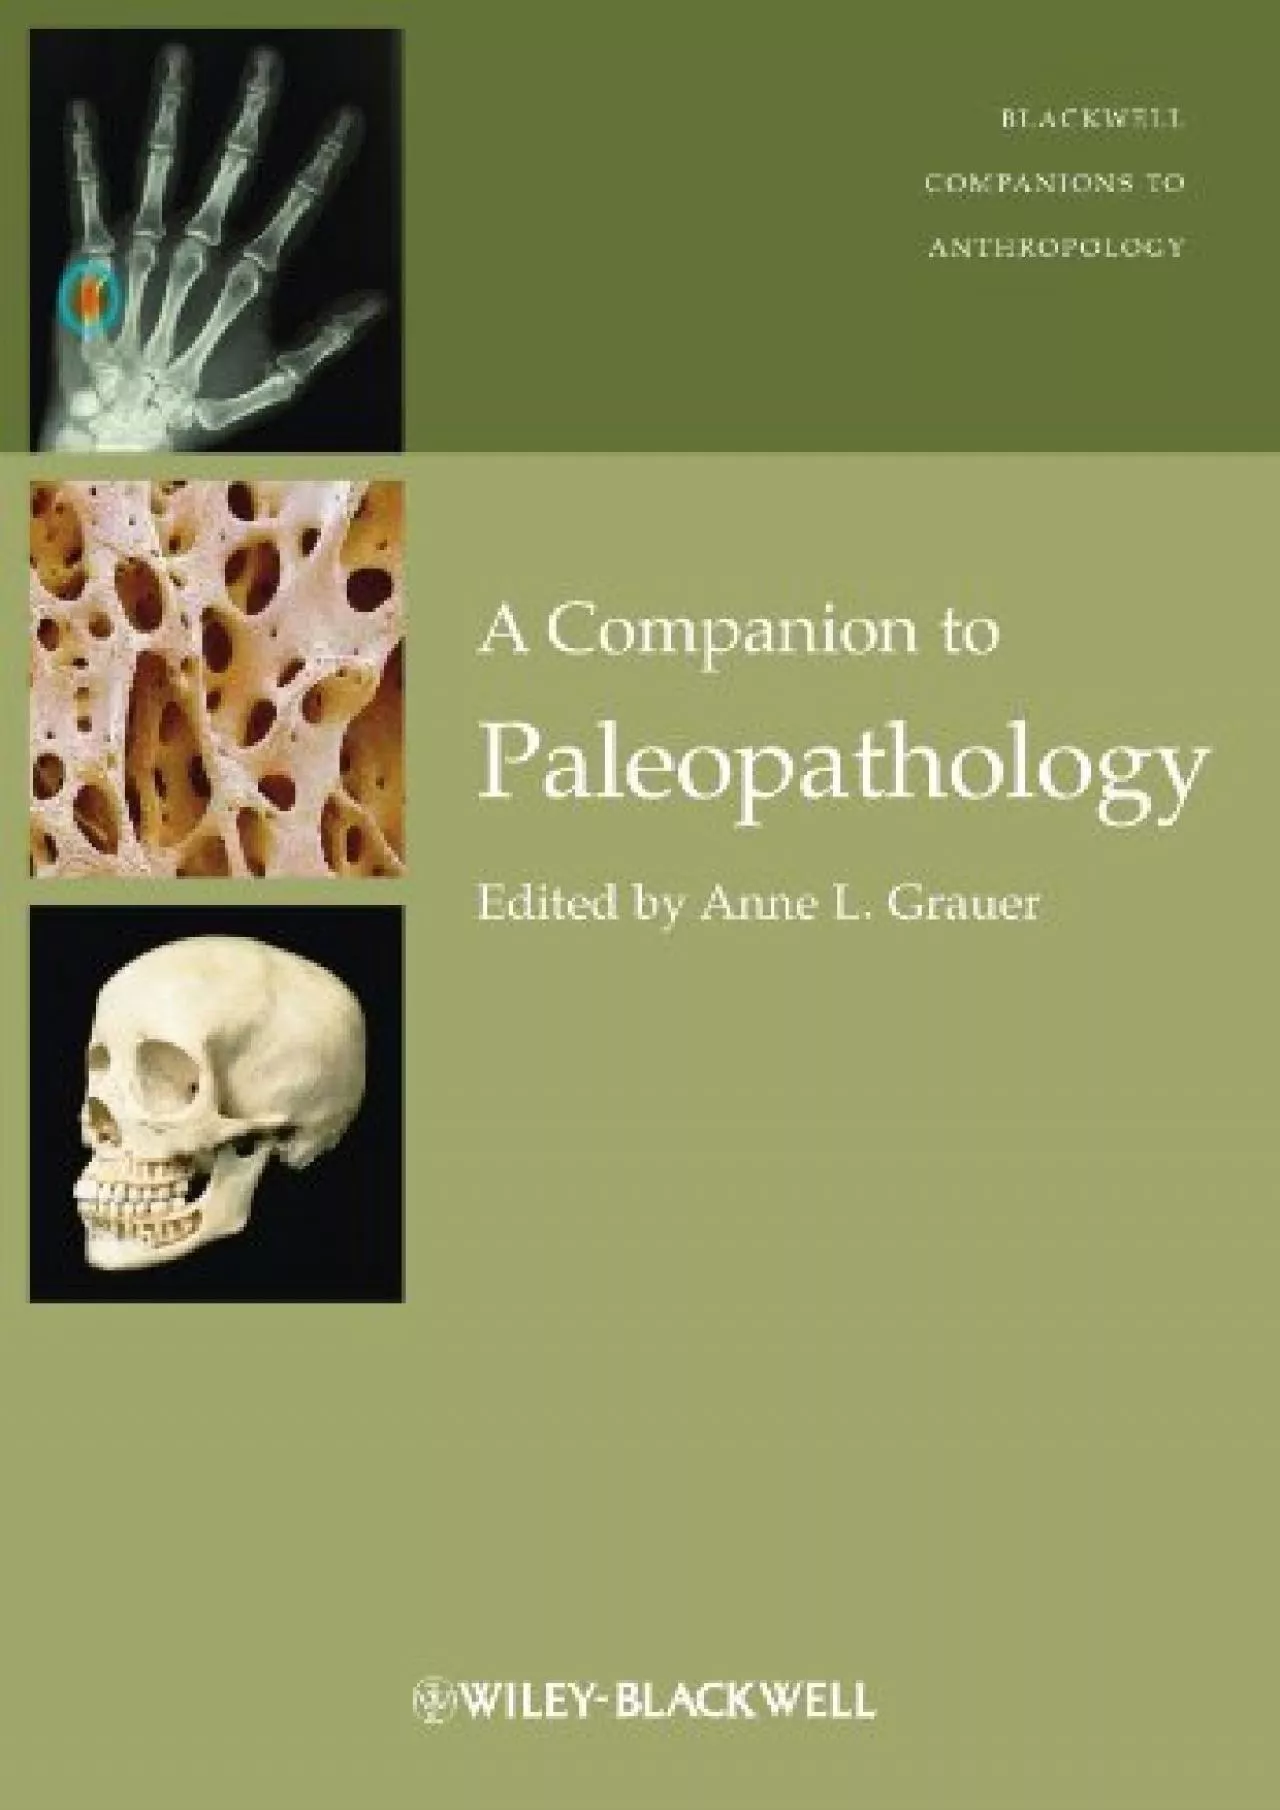 (EBOOK)-A Companion to Paleopathology (Wiley Blackwell Companions to Anthropology Book